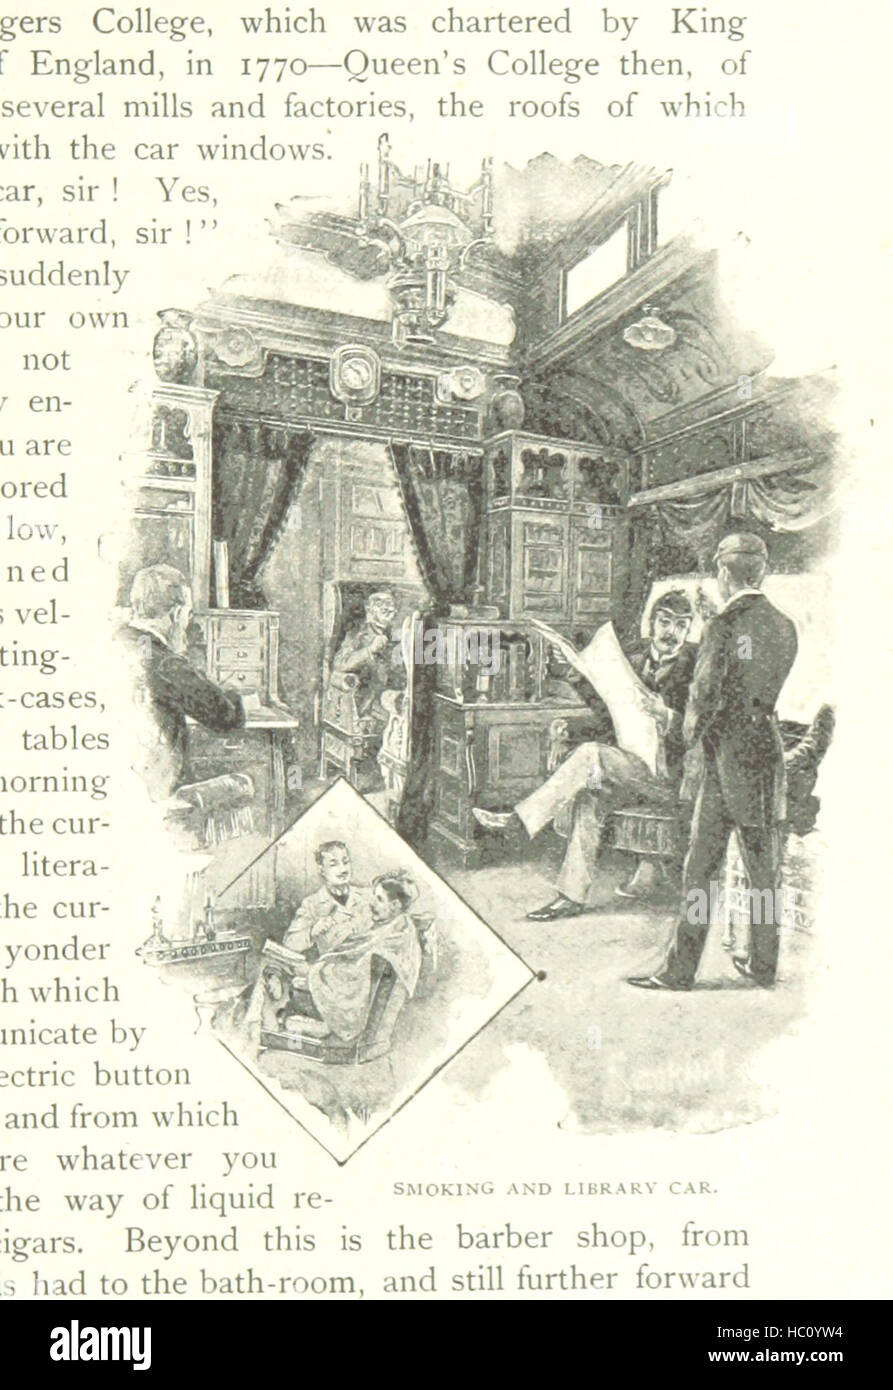 Image taken from page 33 of 'Pennsylvania Railroad to the Columbian Exposition, with descriptive notes of ... New York, Philadelphia, Baltimore, Washington, Chicago, and a complete description of the Exposition grounds and buildings ... Second edition' Image taken from page 33 of 'Pennsylvania Railroad to the Stock Photo